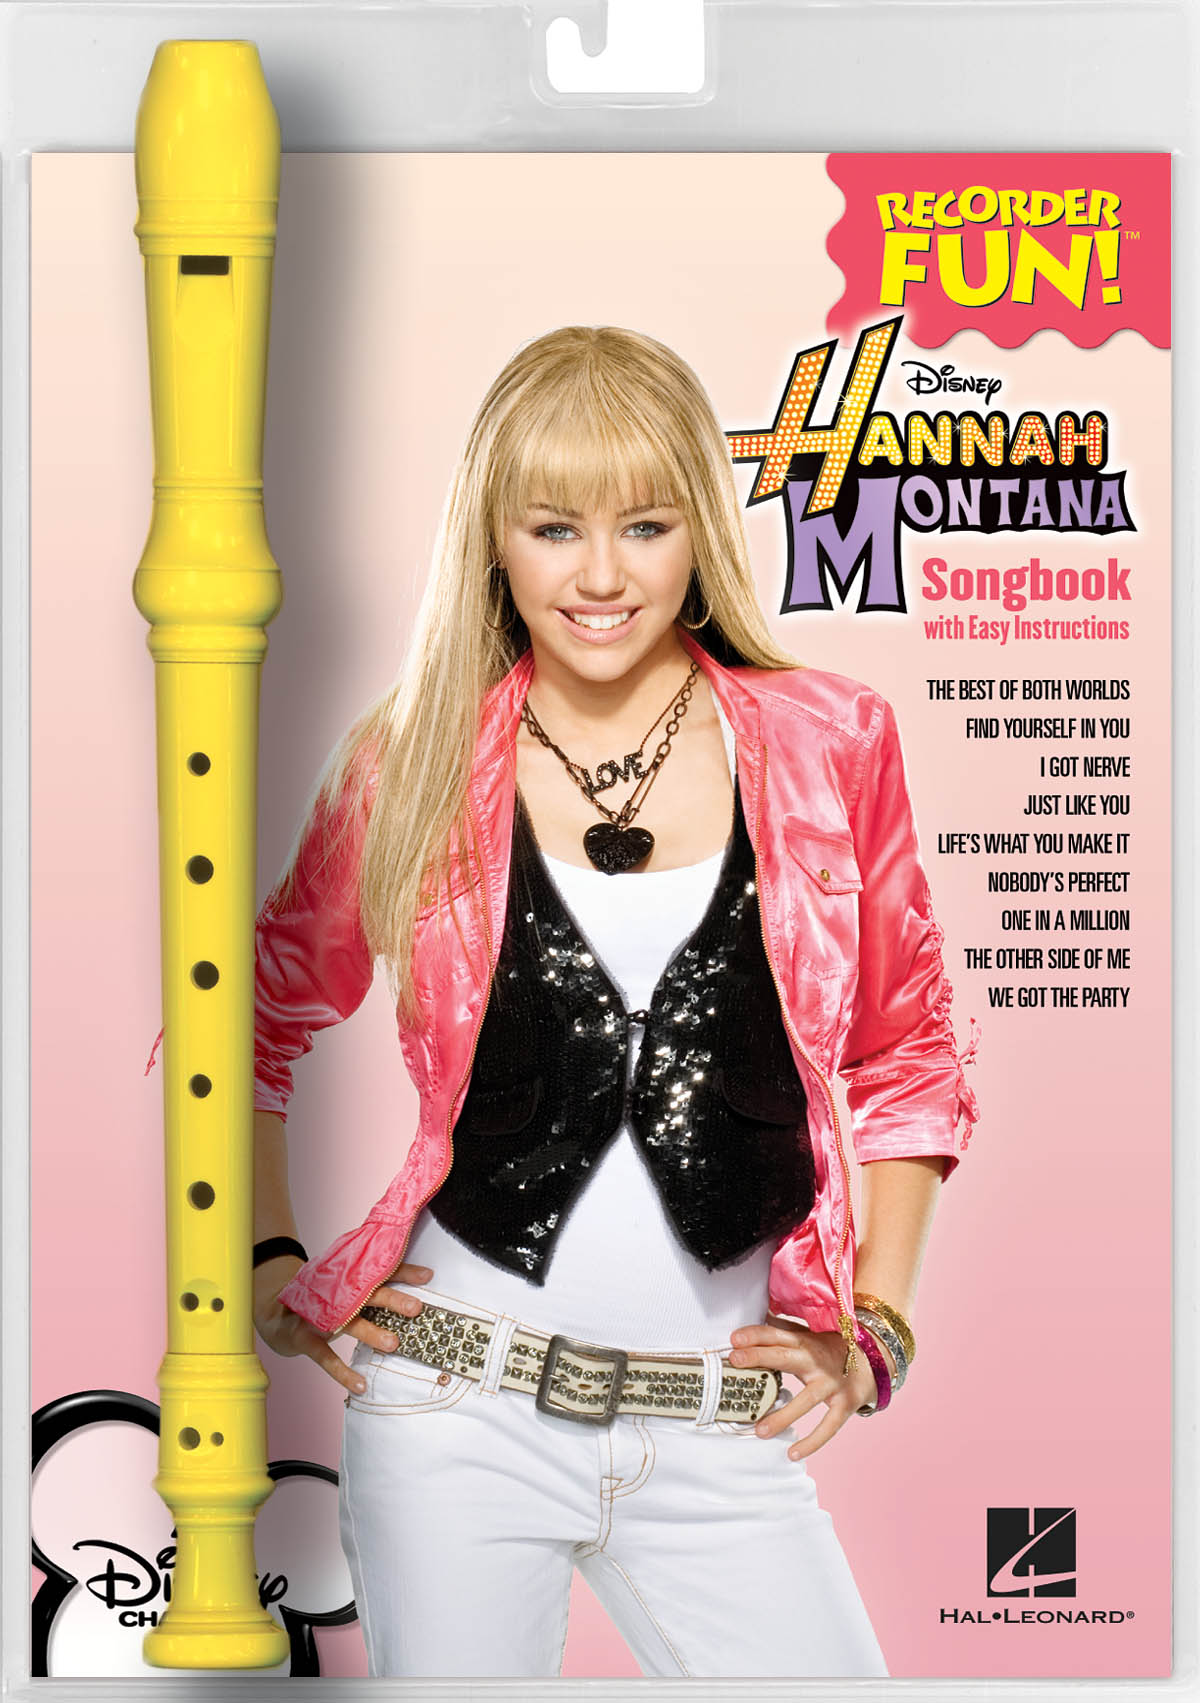 Hannah Montana Recorder Fun ! Pack - Songs From The Hit TV Series - na zobcovou flétnu